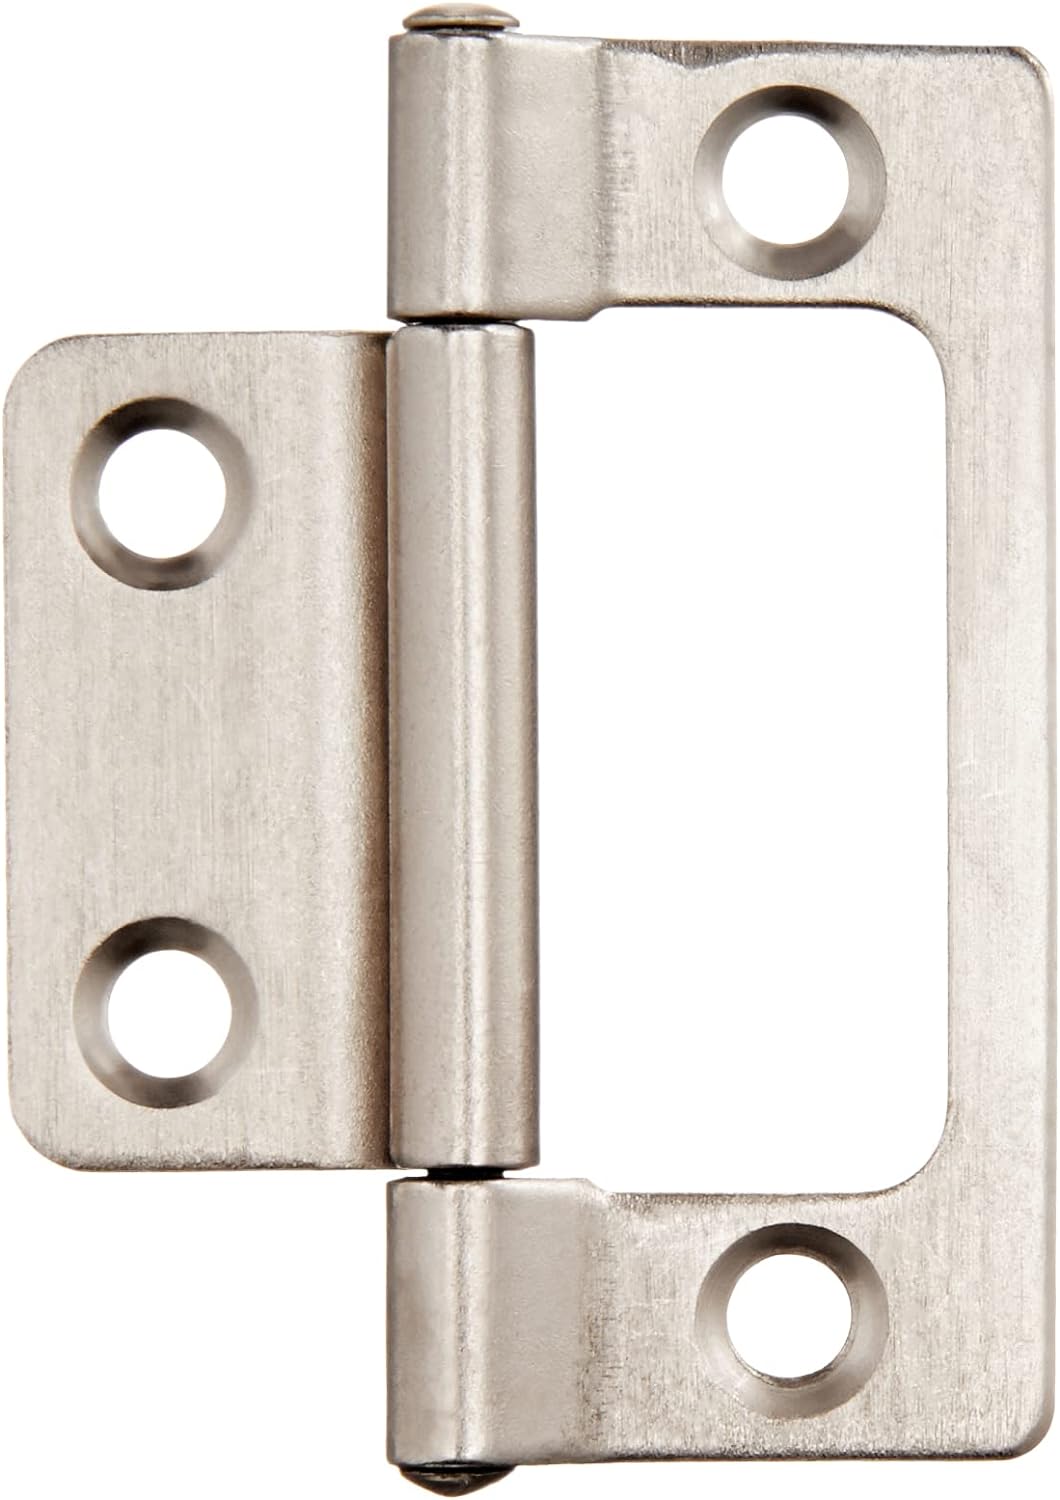 Amazon Basics AB-4019 Non-Mortise Hinges 10-Pack, 2" x 0.9", Stainless Steel